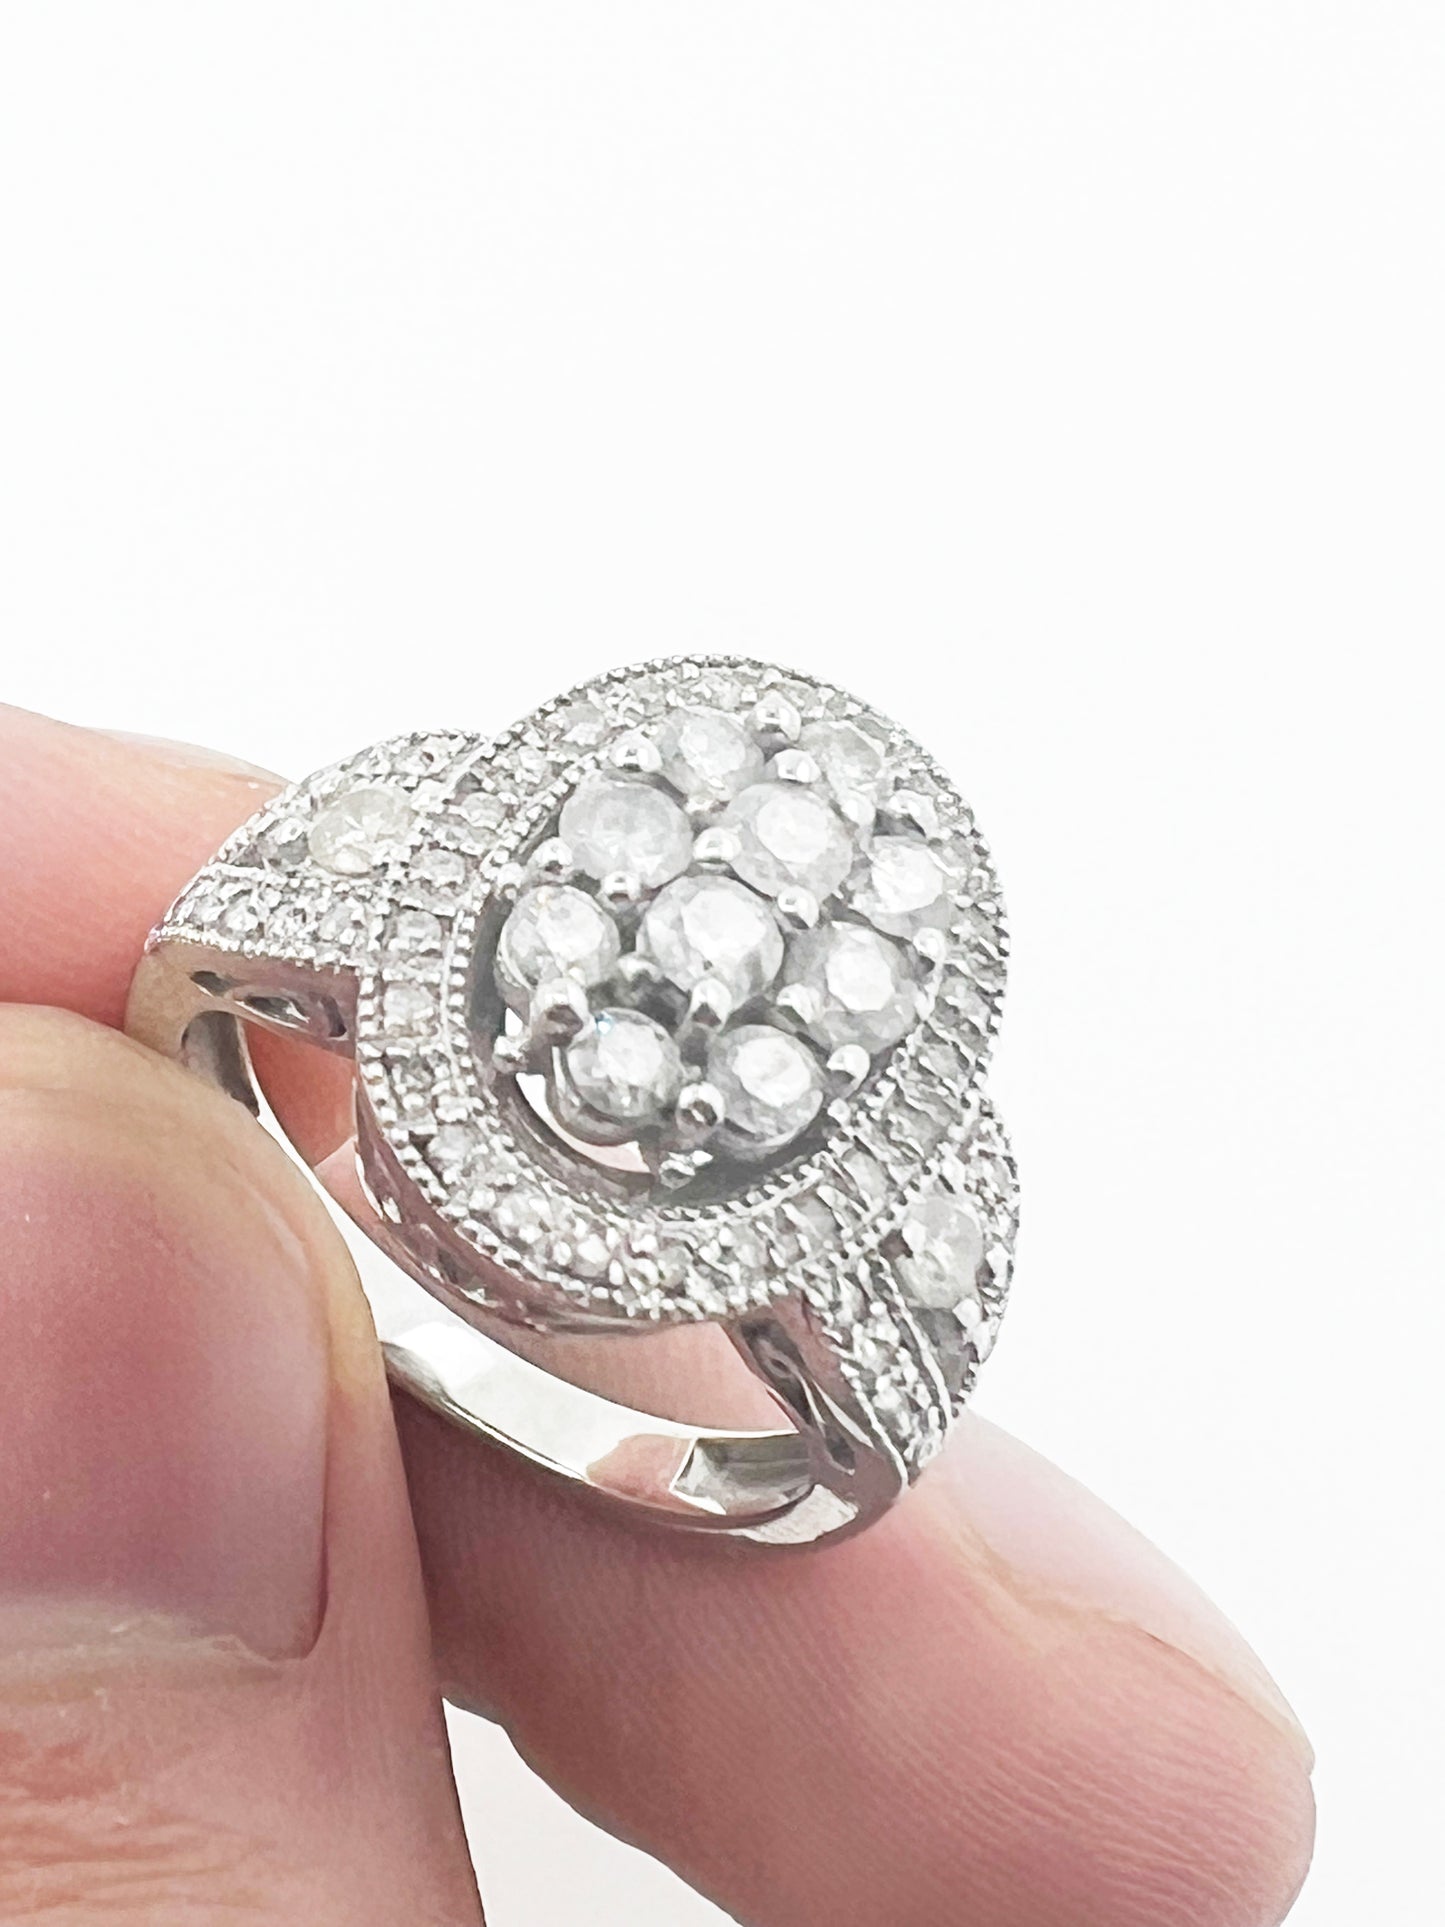 1 TWC. Cluster Ring in 10k White Gold